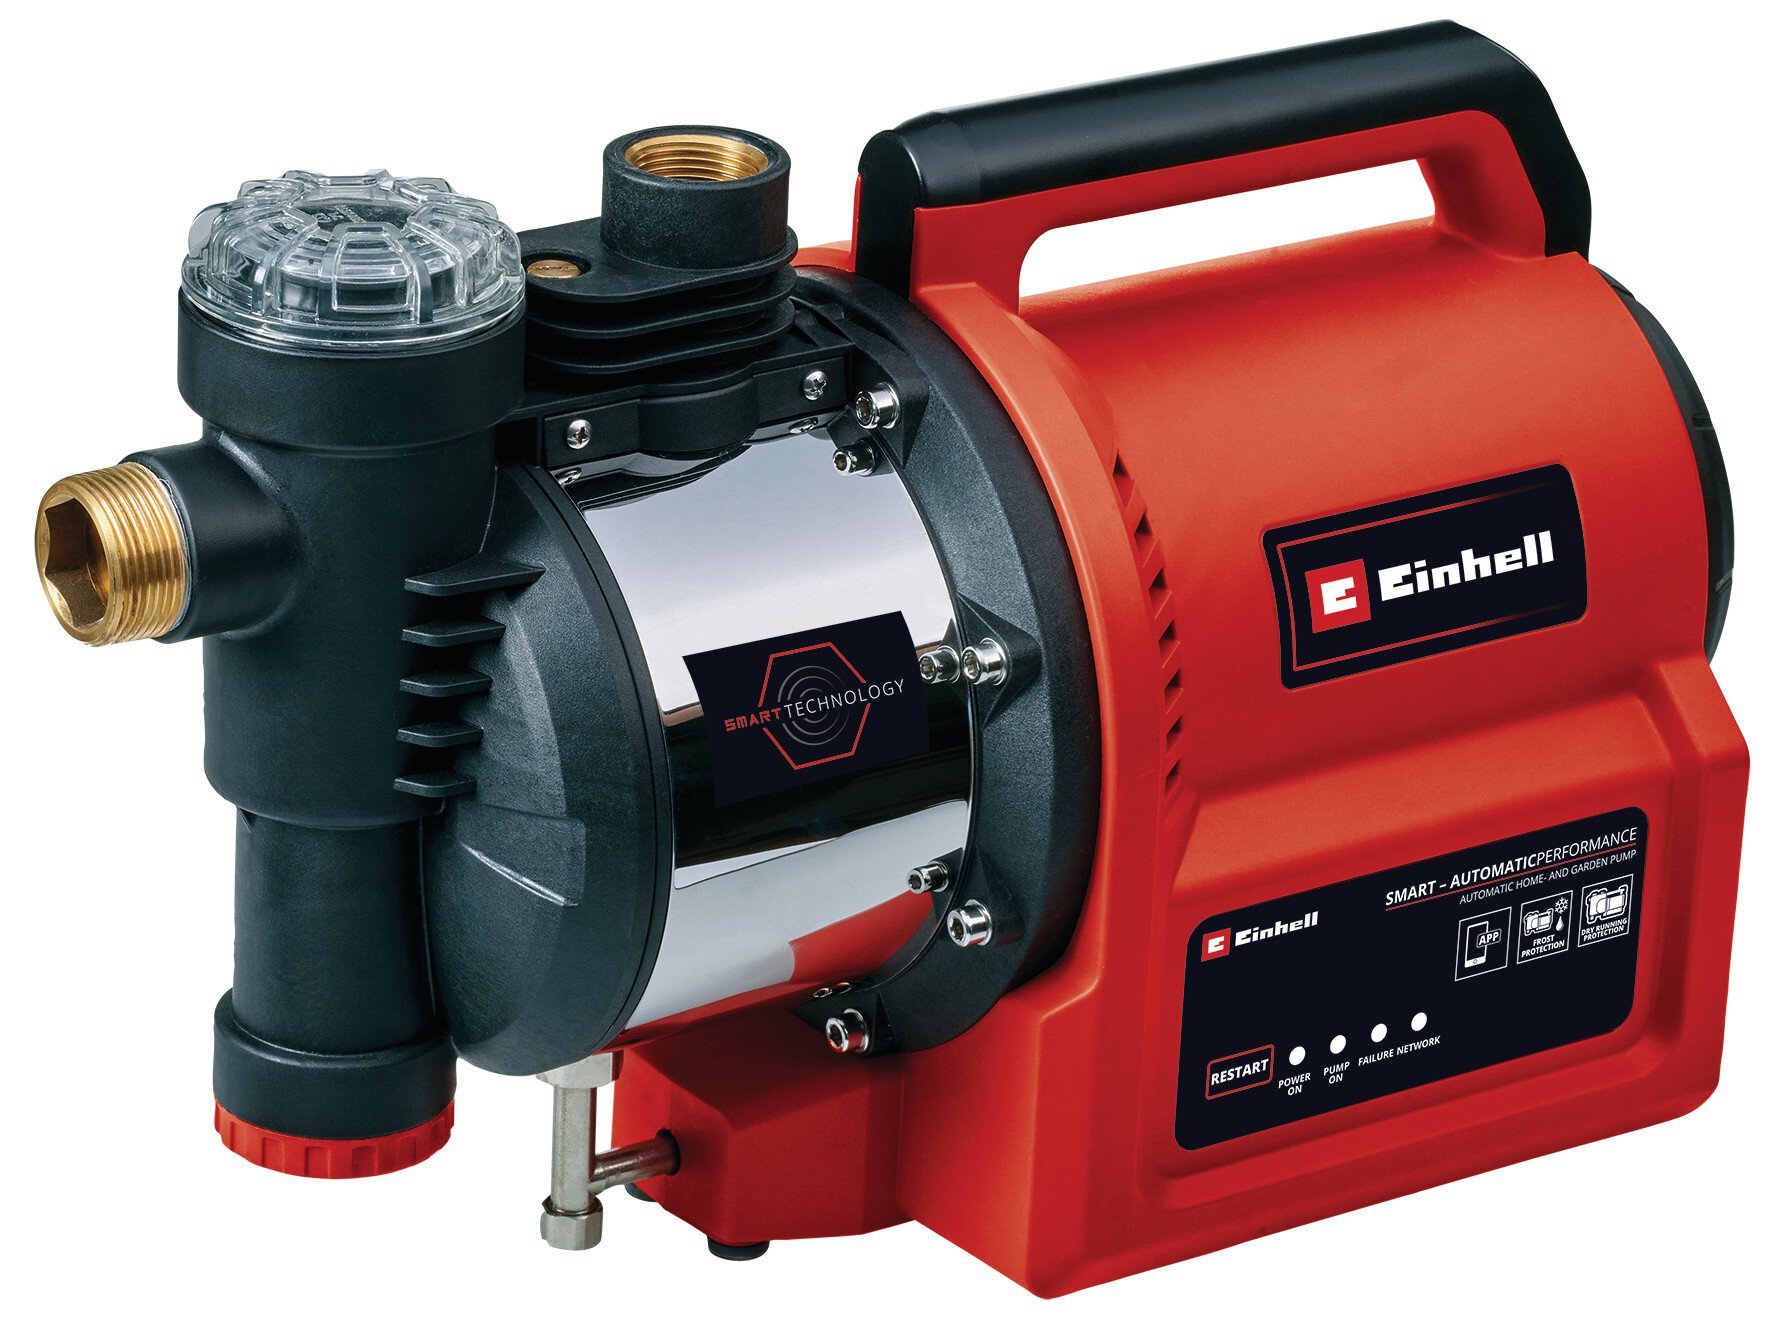 einhell-expert-automatic-water-works-4180380-productimage-001